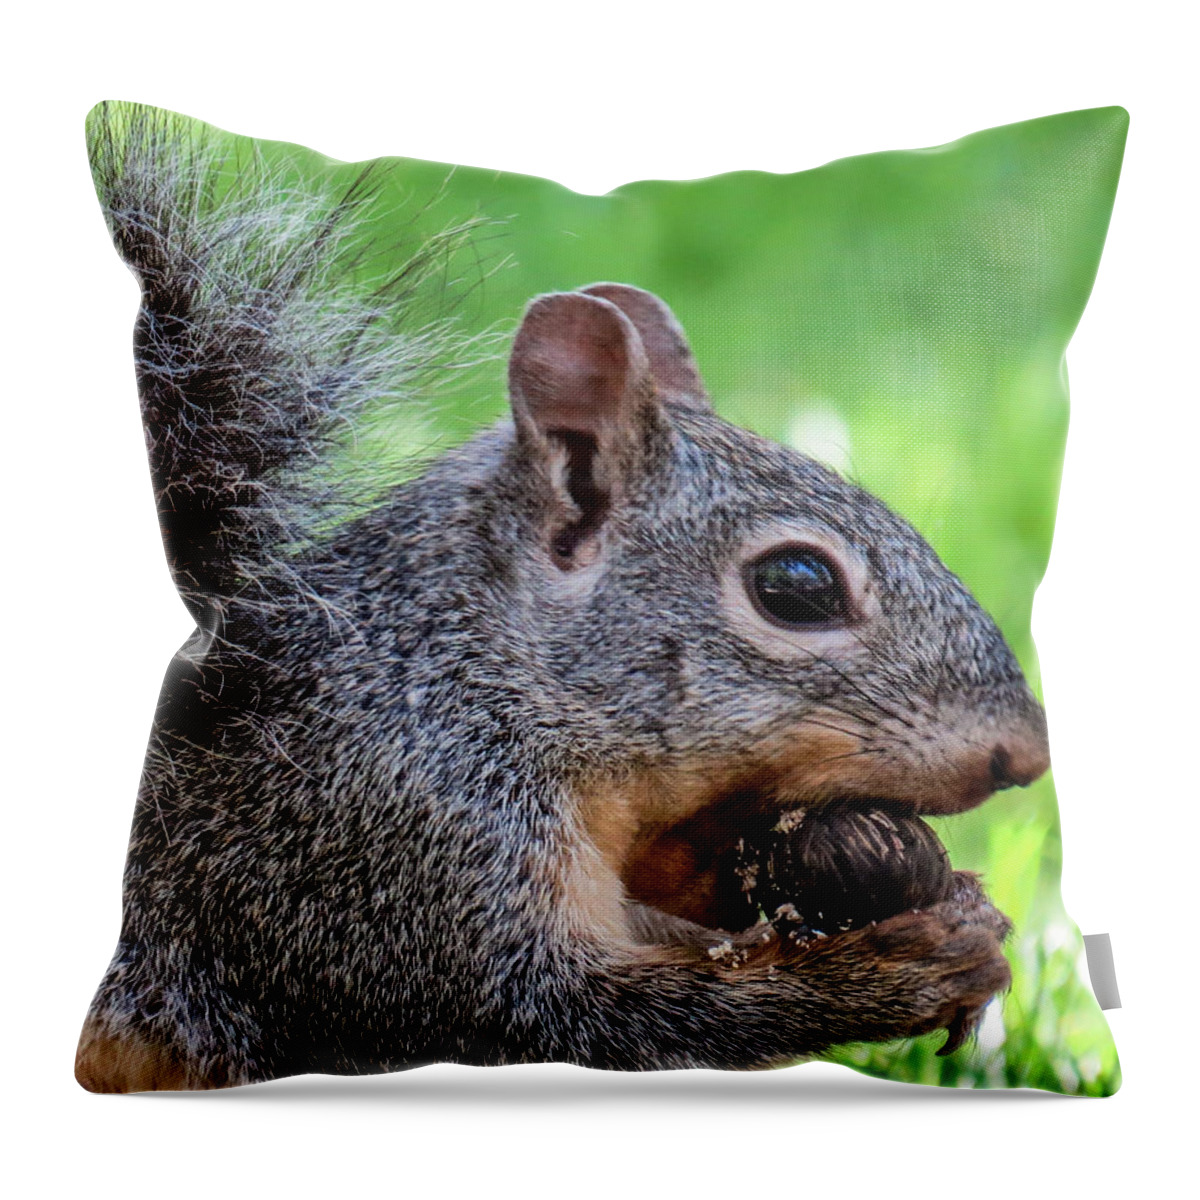 Outdoors Throw Pillow featuring the photograph Squirrel 1 by Christy Garavetto